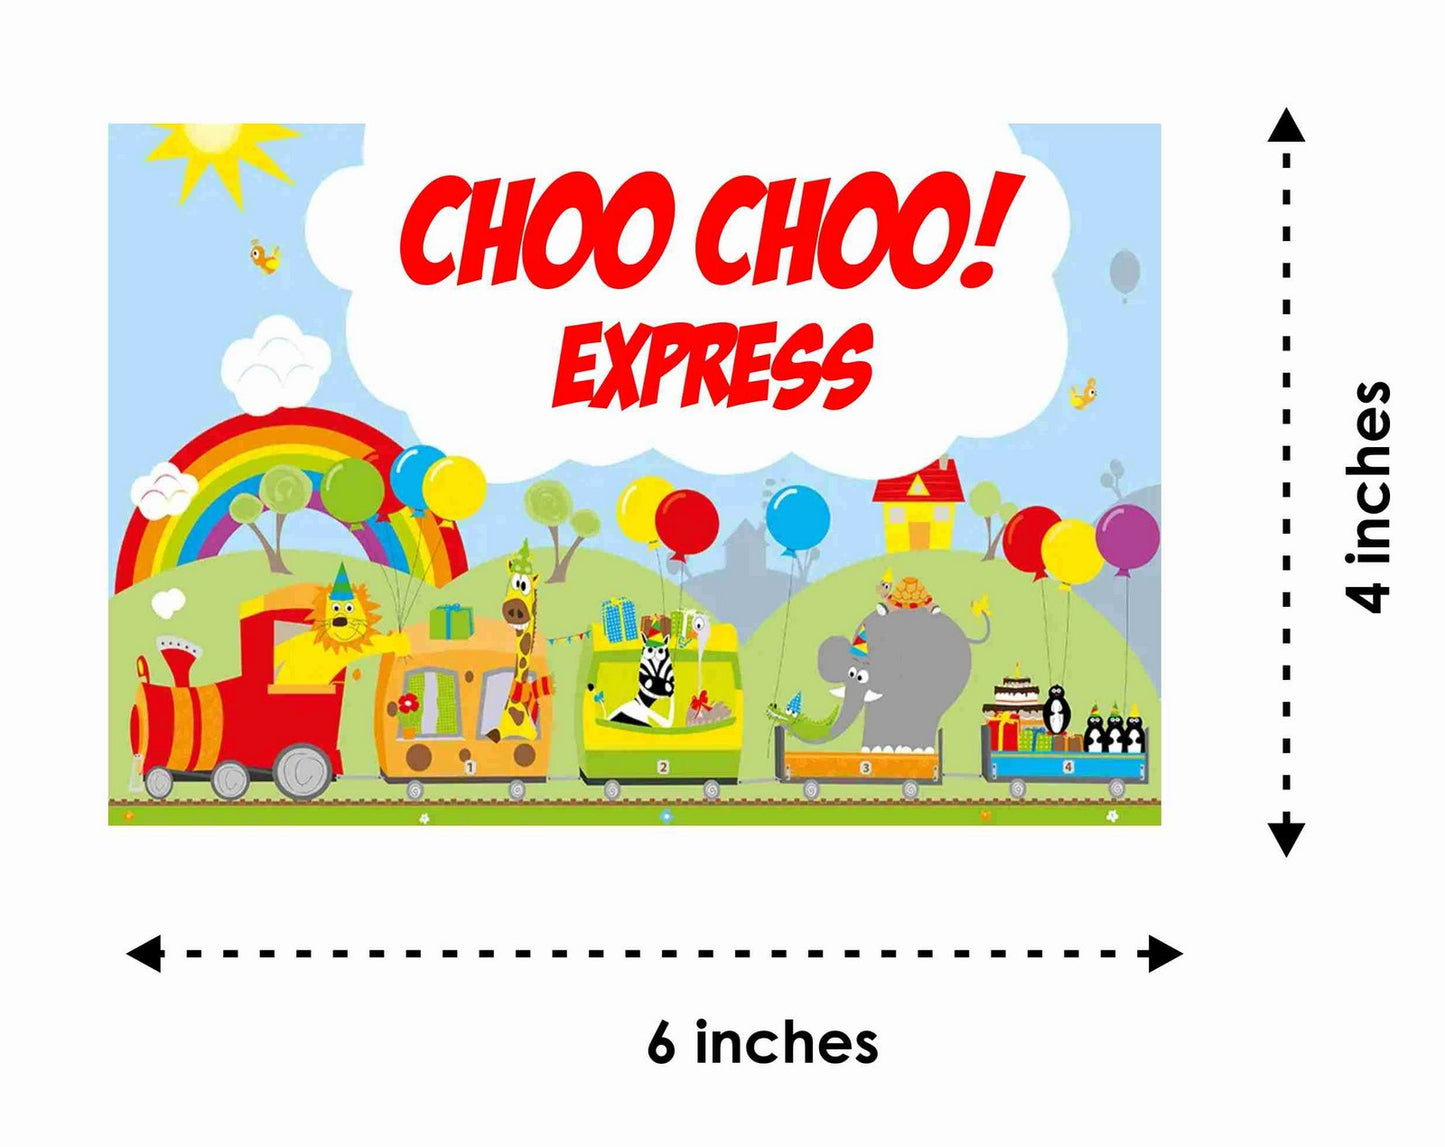 Train Theme Children's Birthday Party Invitations Cards with Envelopes - Kids Birthday Party Invitations for Boys or Girls,- Invitation Cards (Pack of 10)